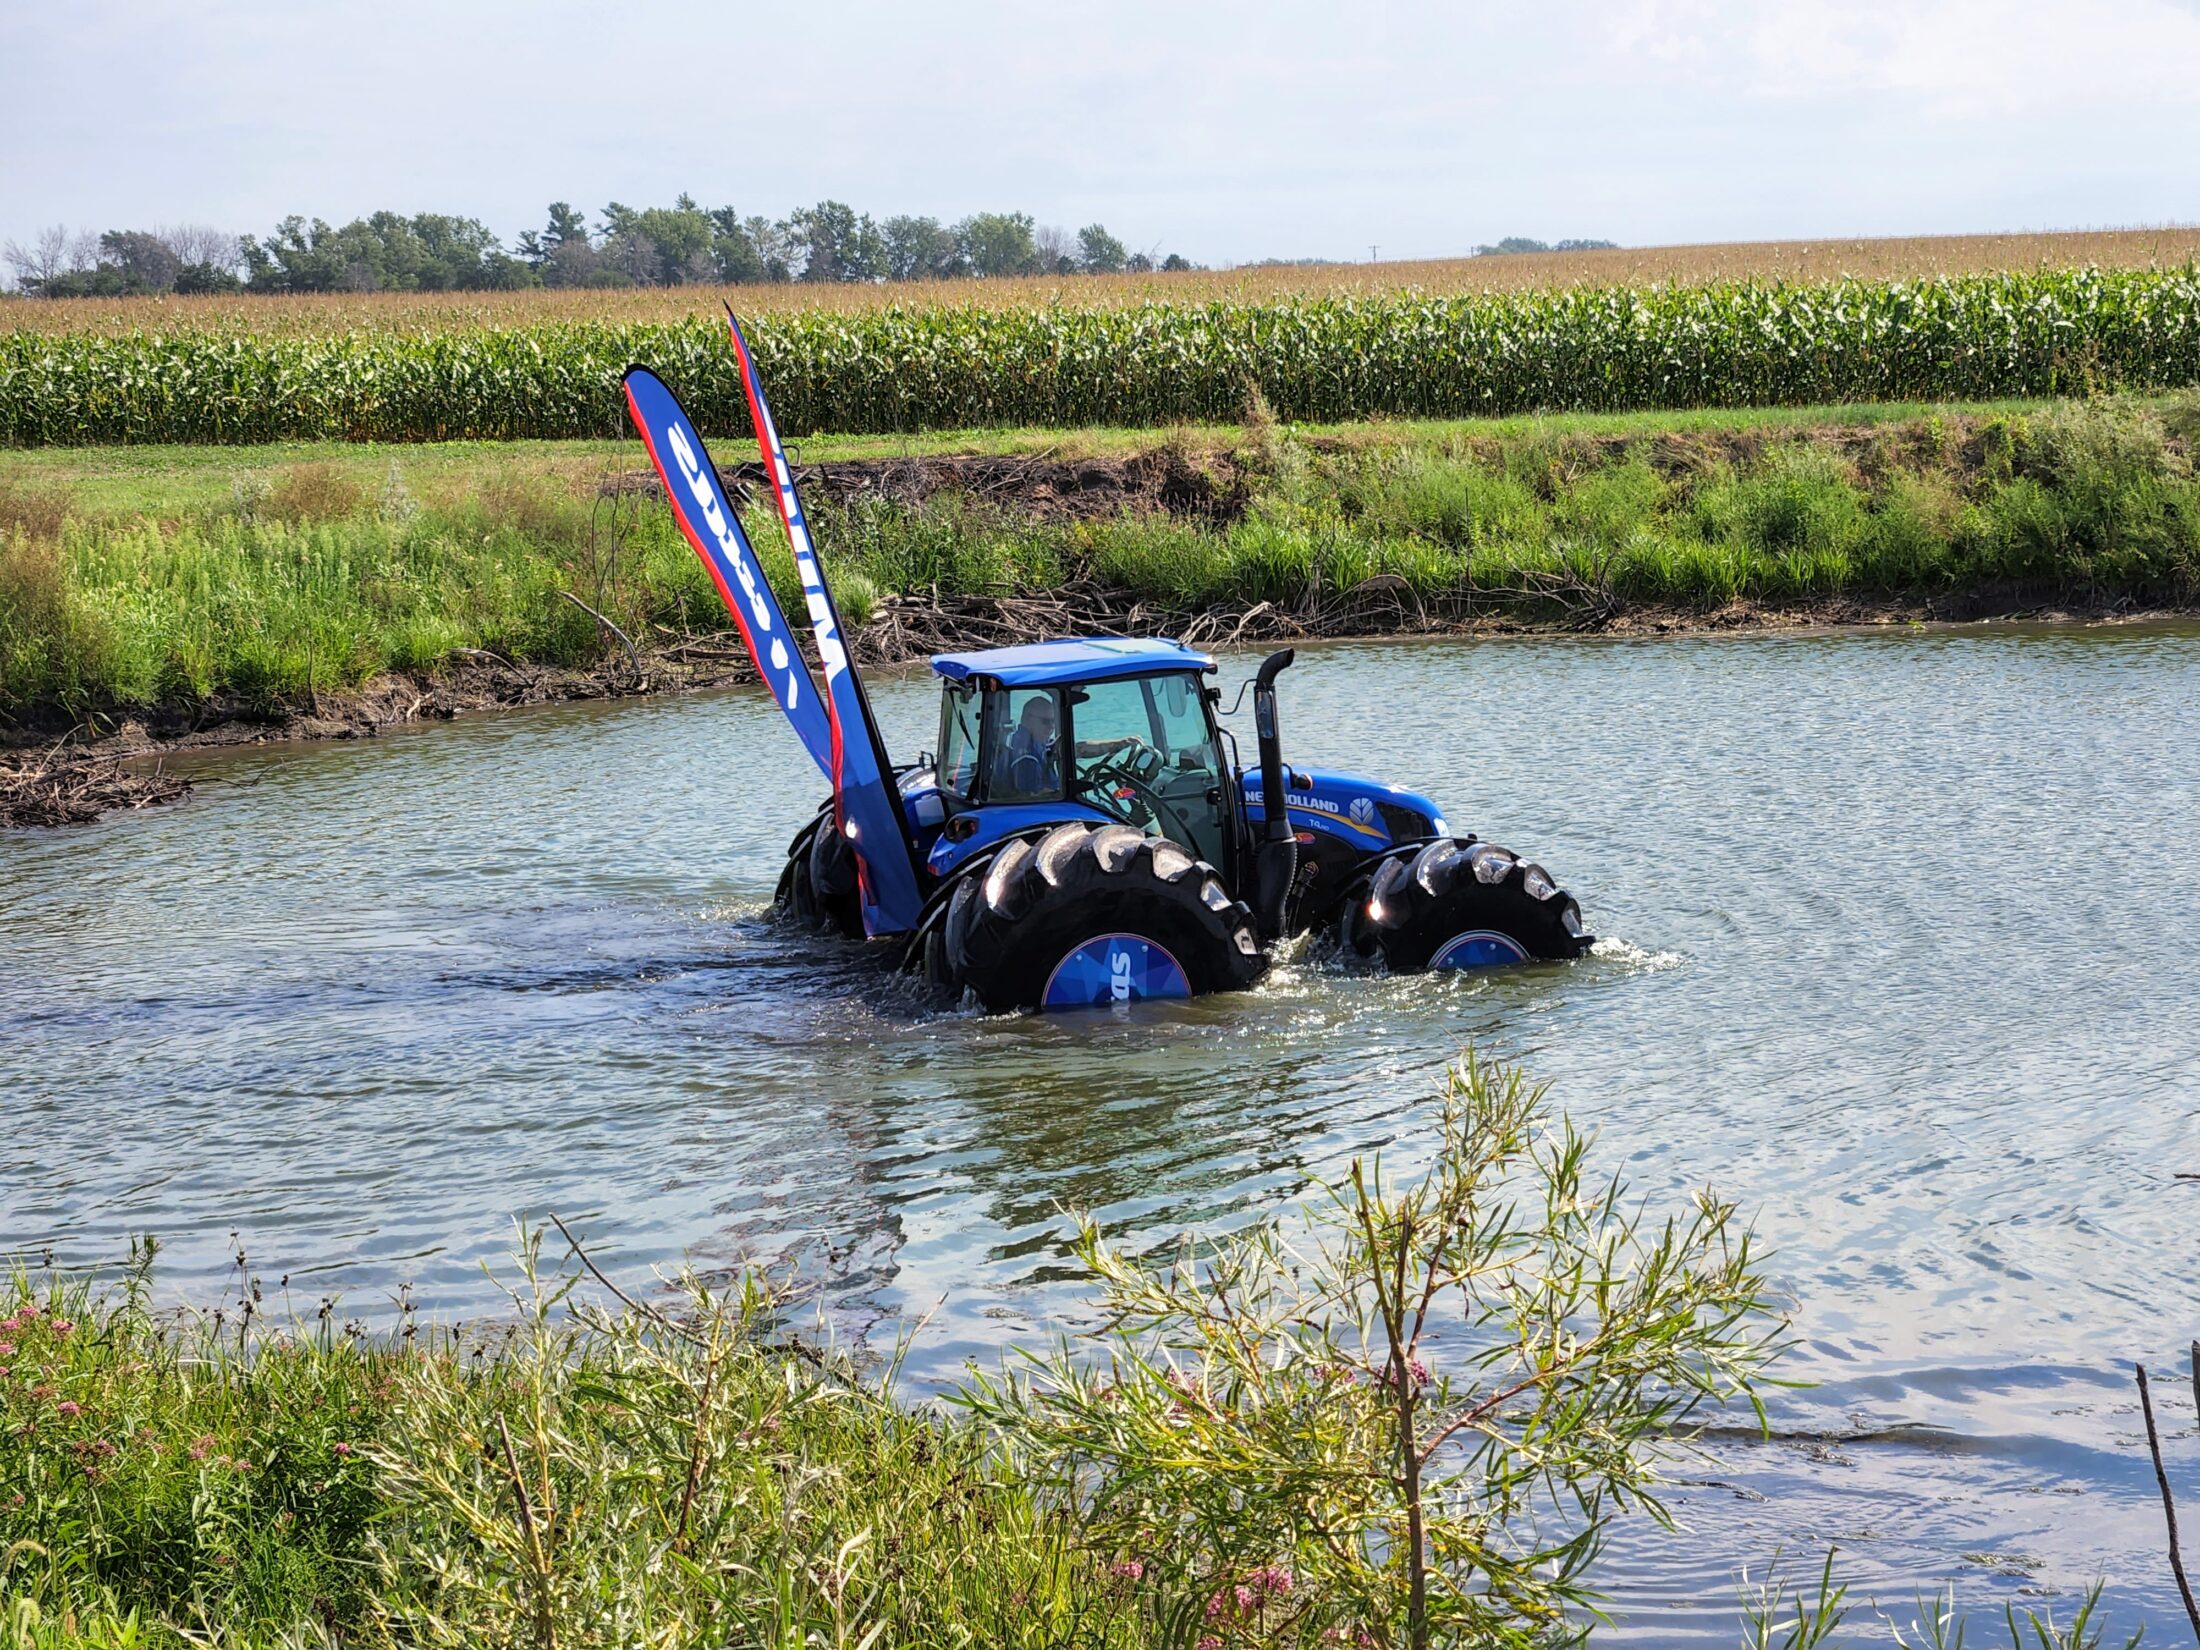 The floating tractor demonstration was held during media day at the Farm Progress Show last Wednesday.